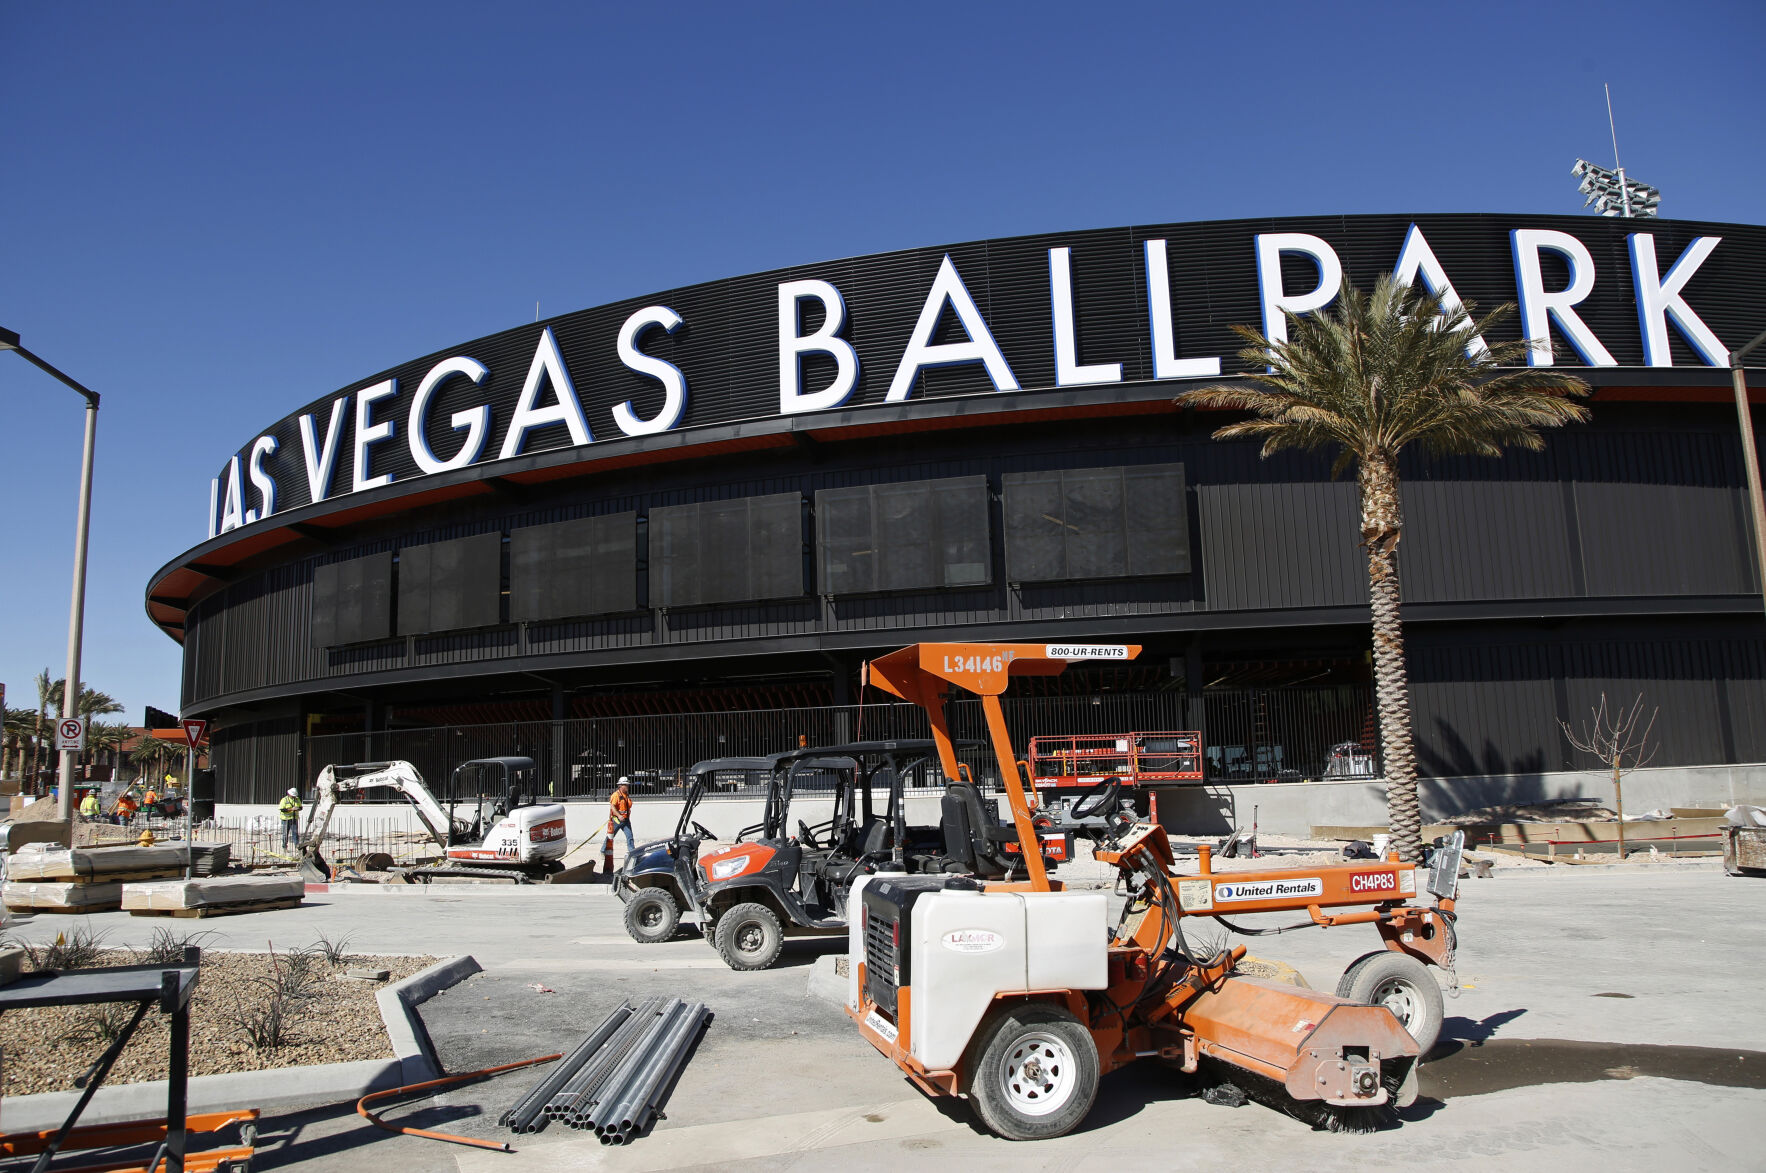 MLB Insider has grim premonition for Athletics move to Las Vegas warns  about dangerous economics of relocation